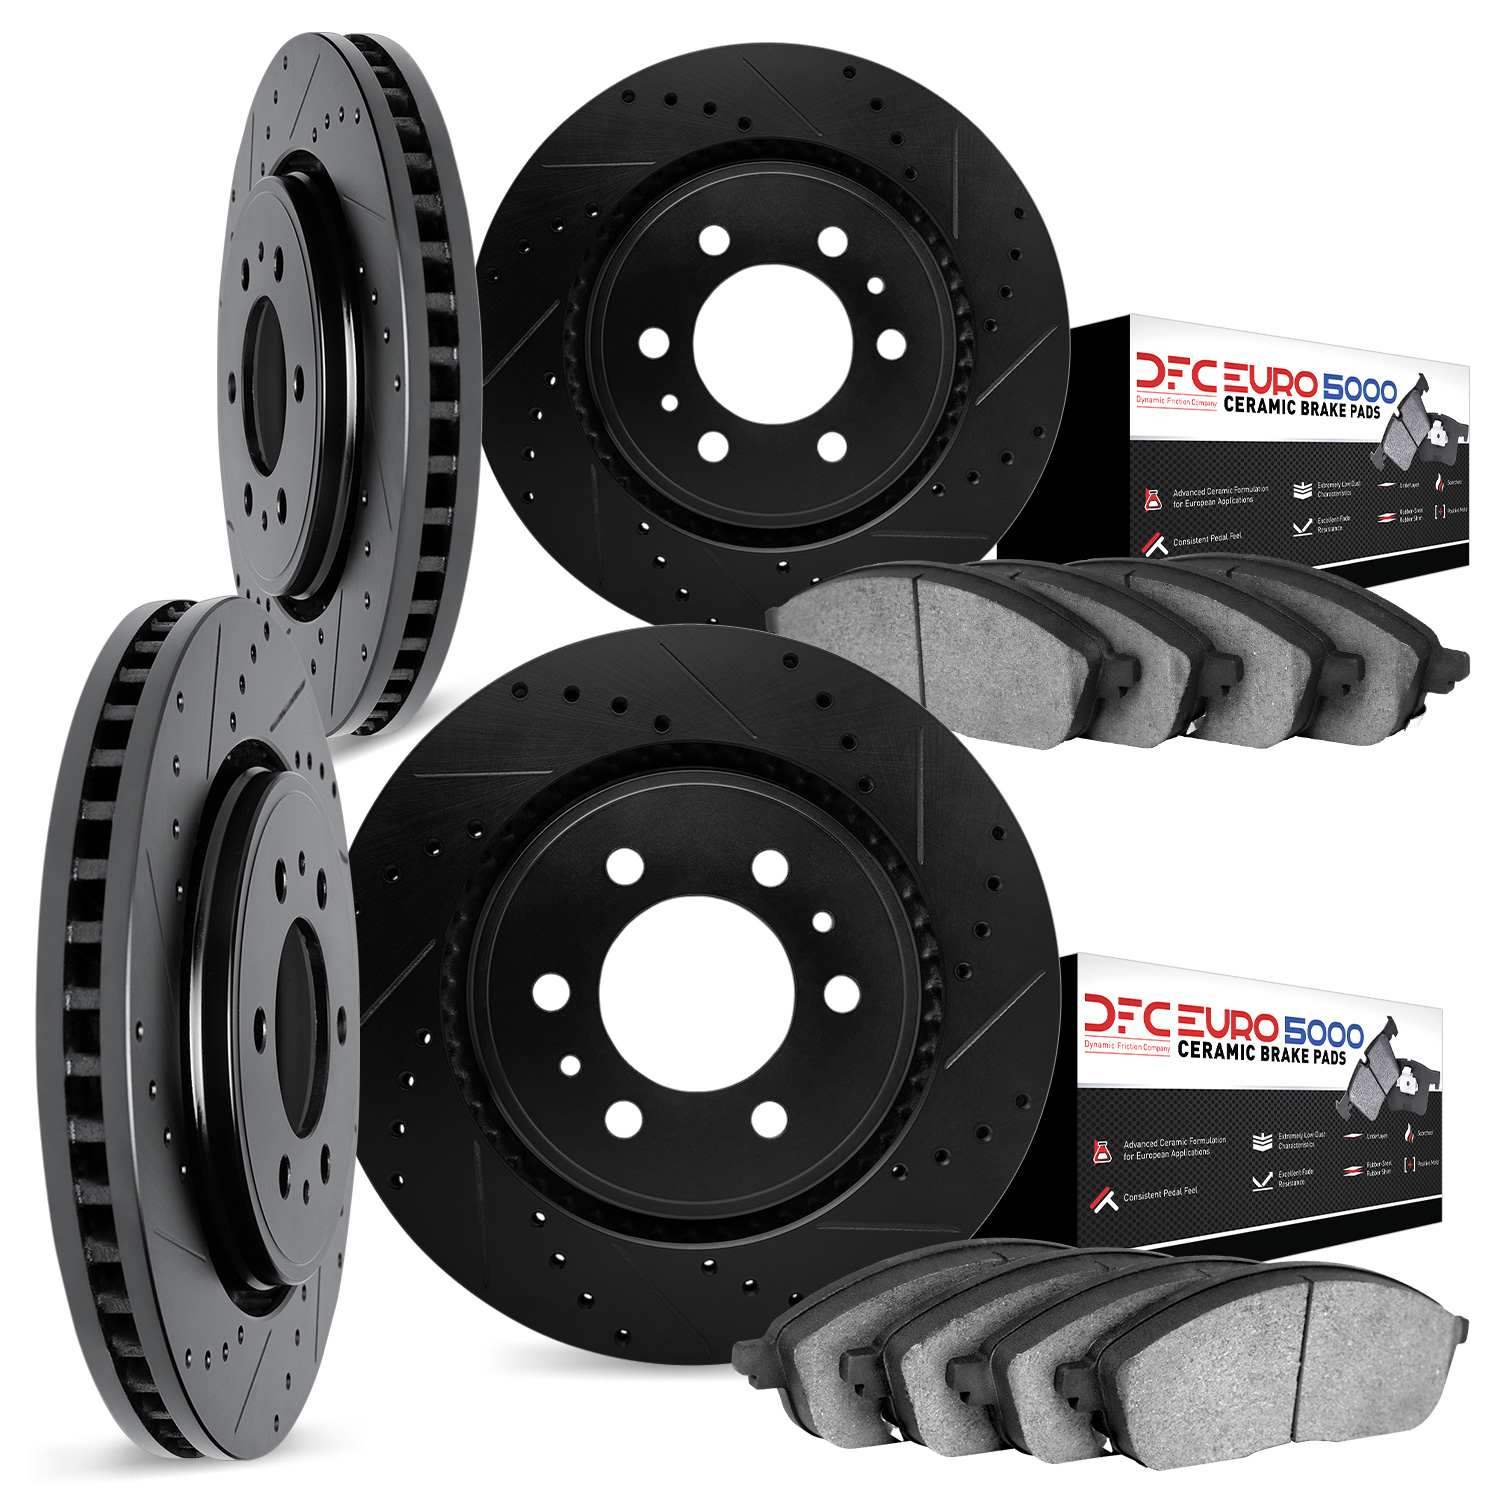 8604-48002 Drilled/Slotted Brake Rotors w/5000 Euro Ceramic Brake Pads Kit [Black], 2006-2009 GM, Position: Front and Rear